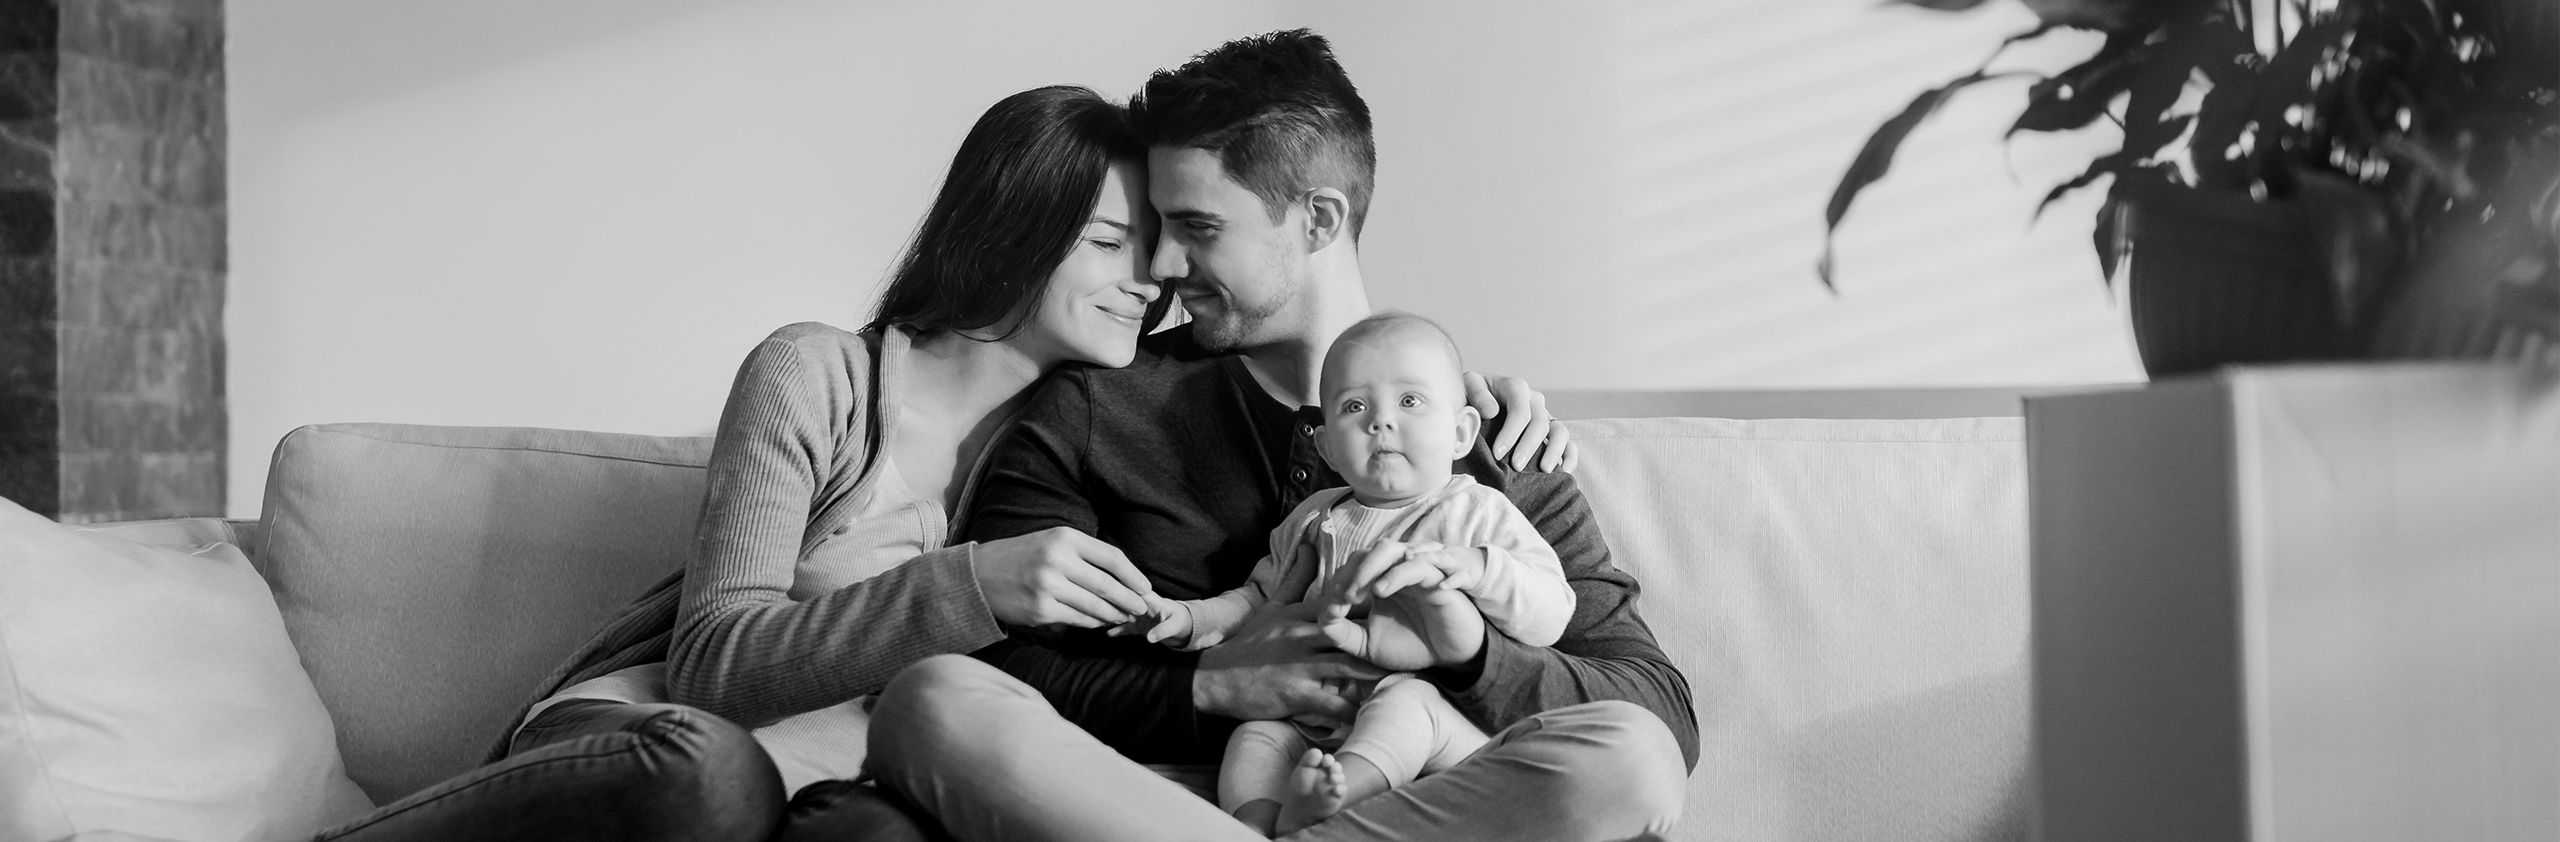 a happy family with baby on couch